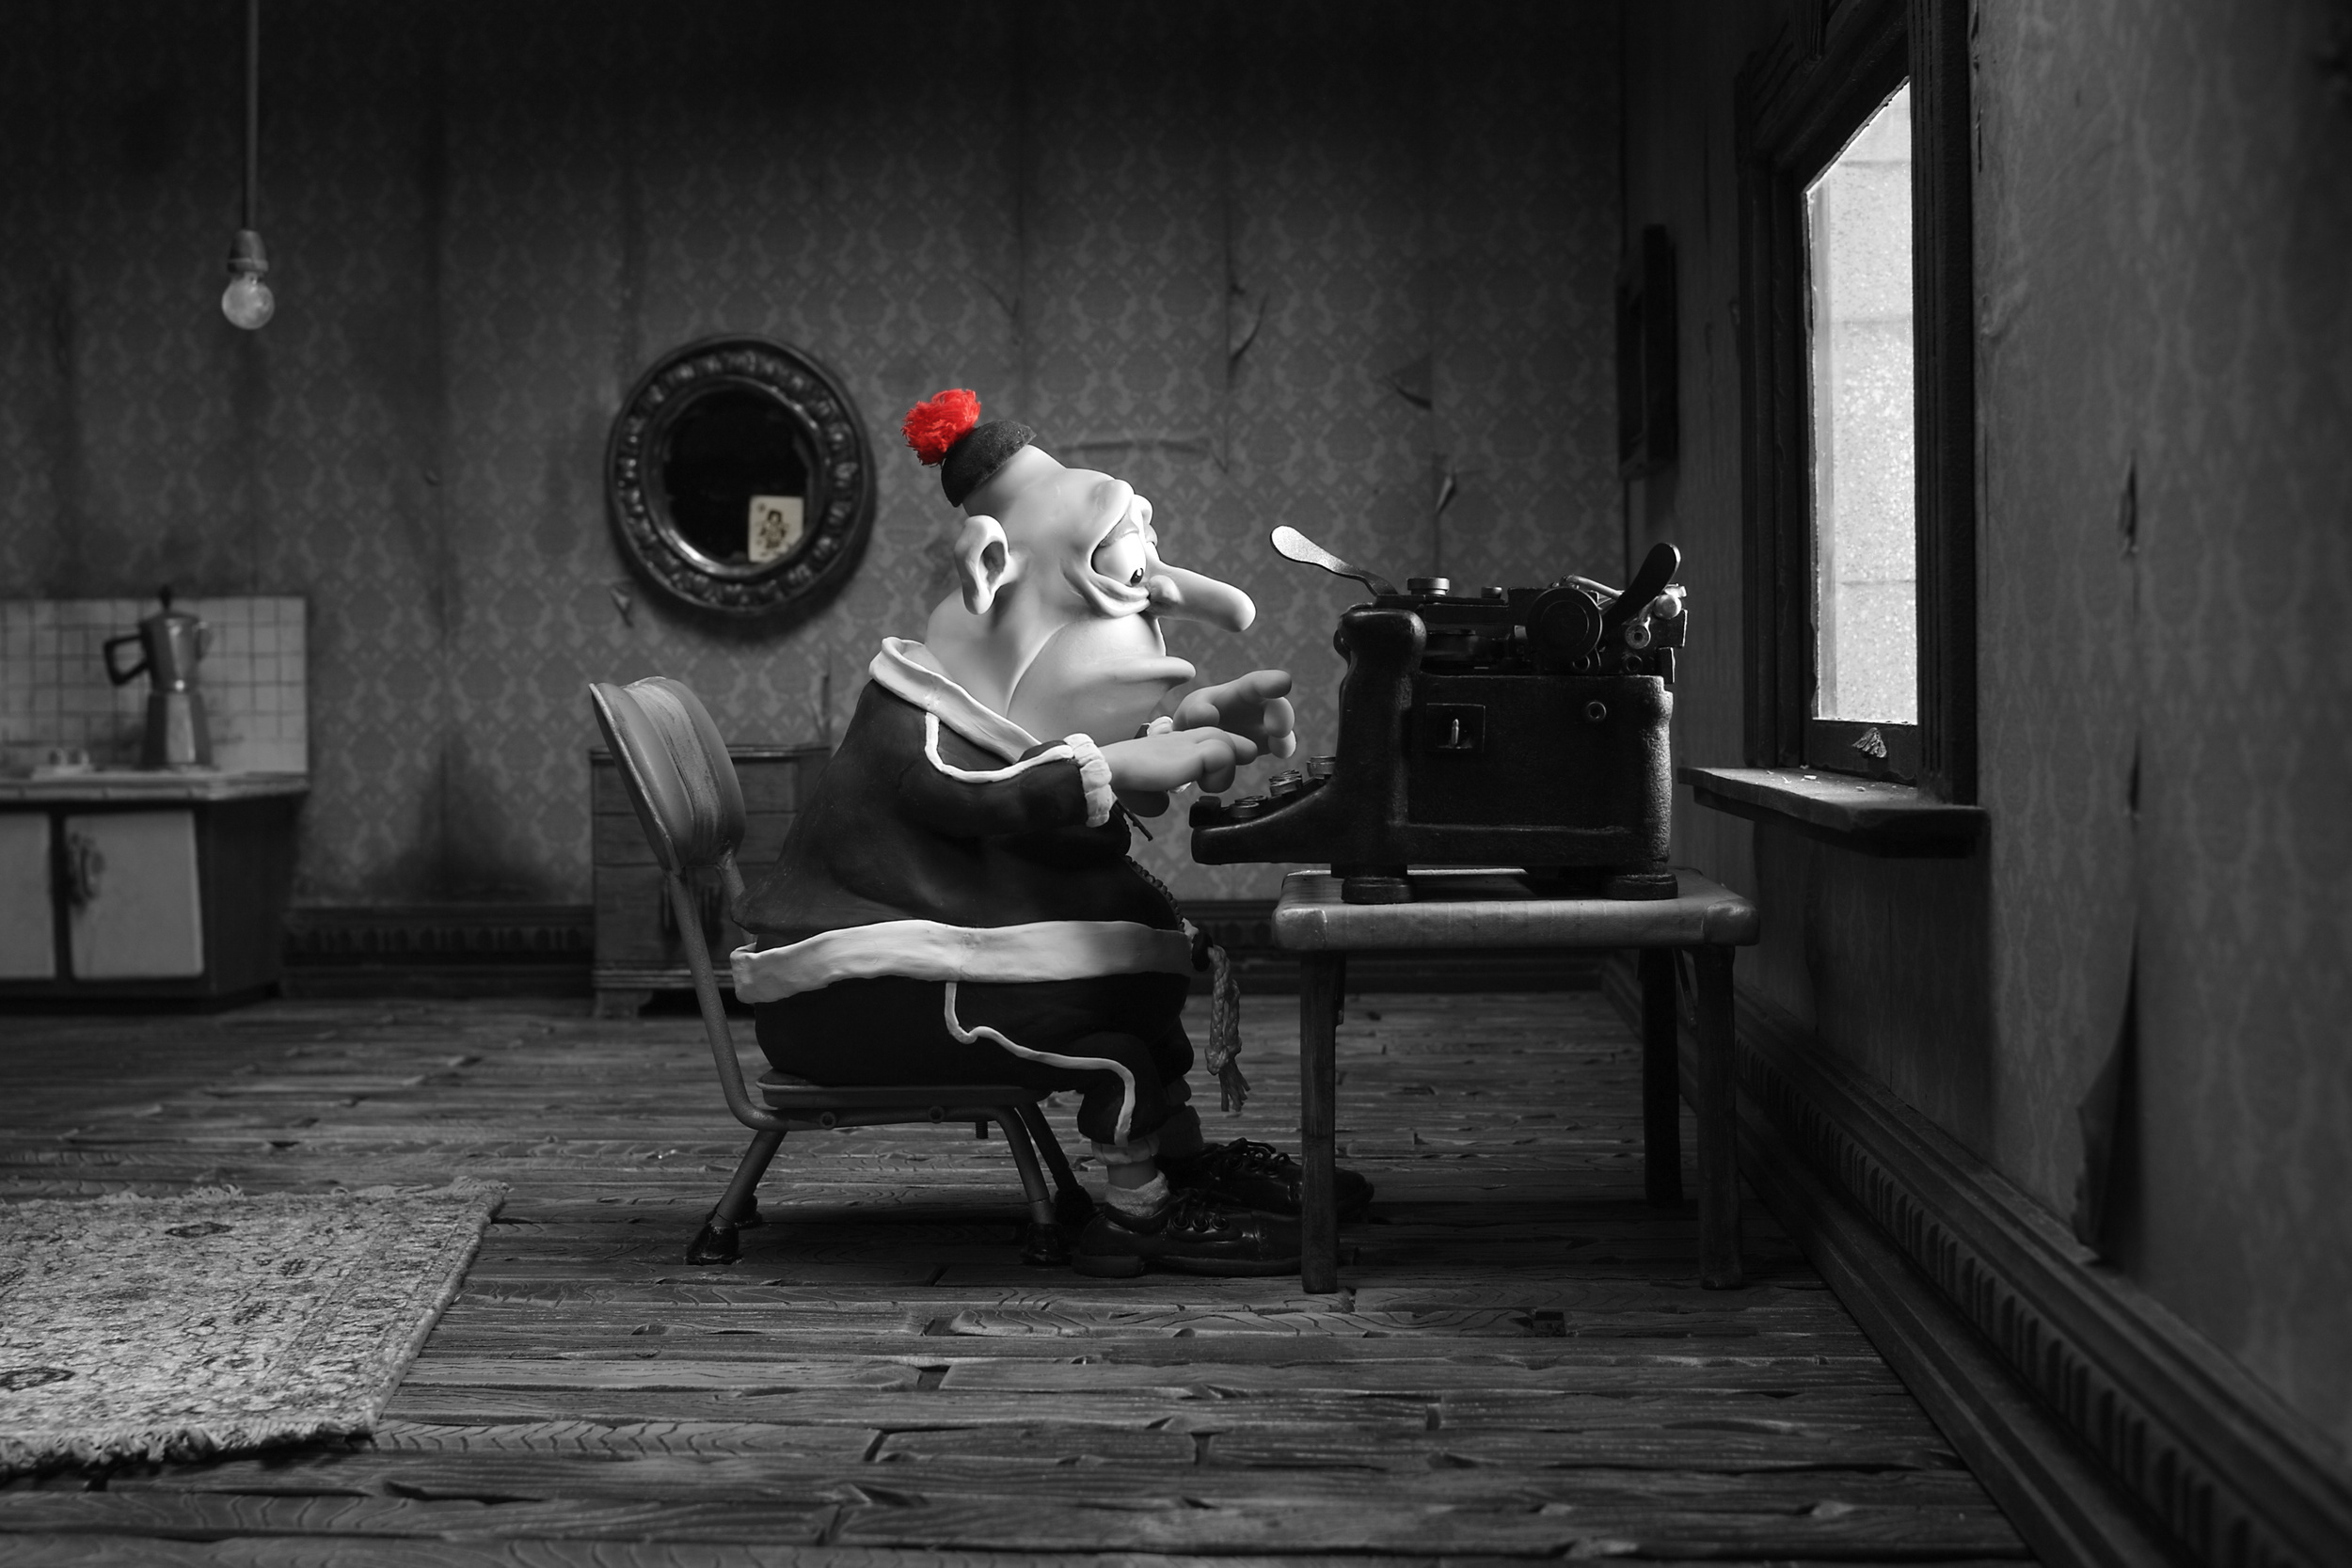 <p><em>Mary and Max</em> is a somber yet hopeful tale about the weight of loneliness and the power of friendship and human connection. The film follows Mary, a friendless eight-year-old girl living in Melbourne, and Max, a forty-year-old man from New York who is deeply depressed. Through luck and a phone book, the two become pen-pals and help each other through their pain on opposite sides of the world. Toni Collette and Philip Seymour Hoffman provide the titular voices.</p><p>You may also like: <a href='https://www.yardbarker.com/entertainment/articles/2000s_movies_that_are_so_bad_theyre_good_022824/s1__39784595'>2000s movies that are so bad they’re good</a></p>